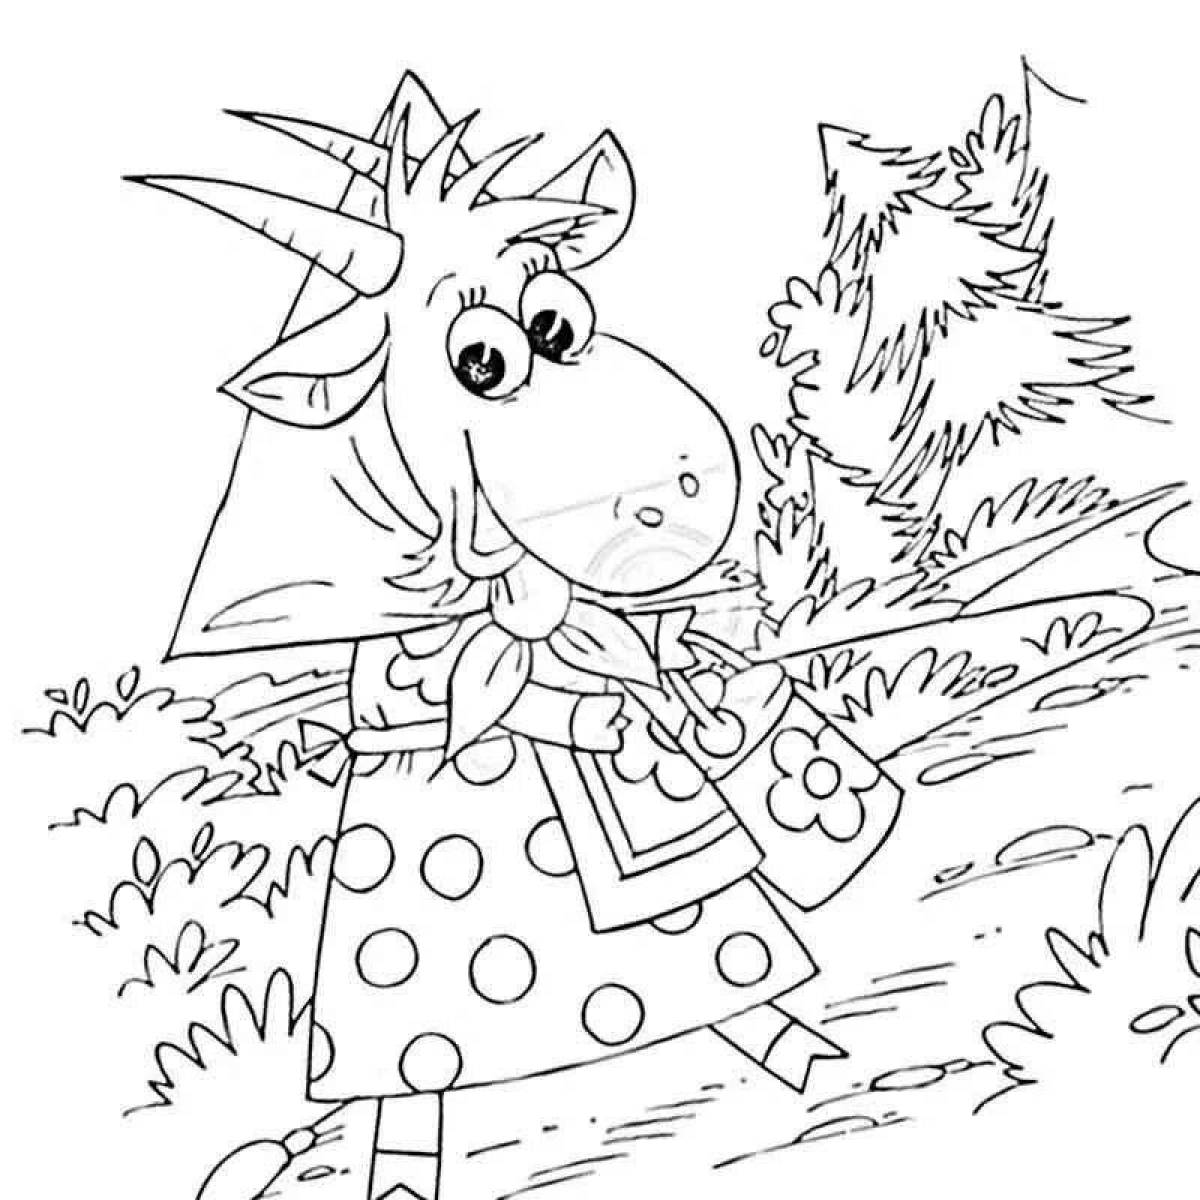 Adorable wolf and seven kids coloring book